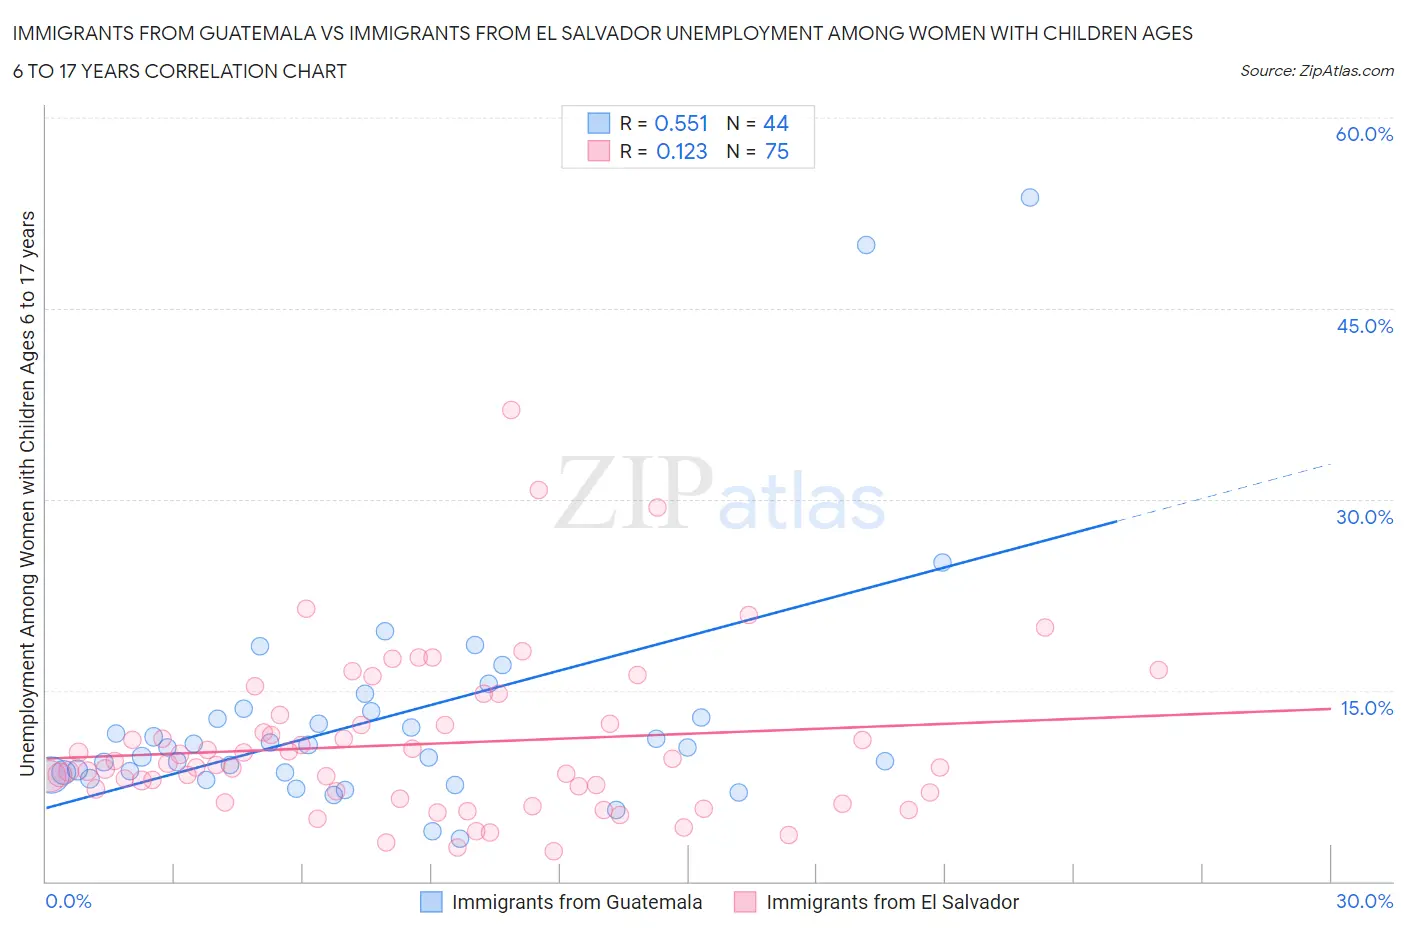 Immigrants from Guatemala vs Immigrants from El Salvador Unemployment Among Women with Children Ages 6 to 17 years